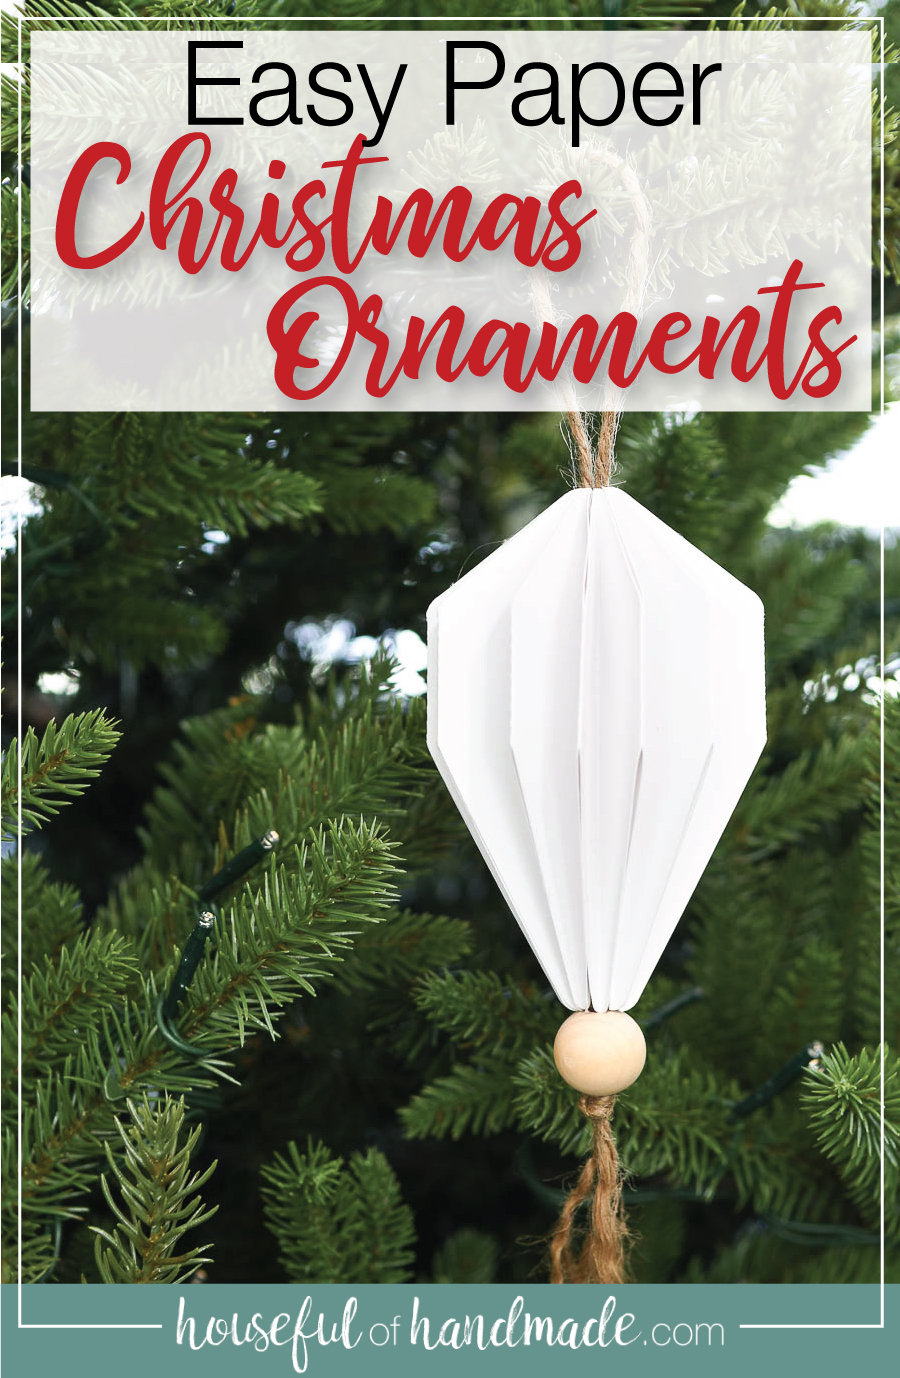 3D Jewel Christmas ornament hanging on a tree with text overlay: easy paper Christmas ornaments.